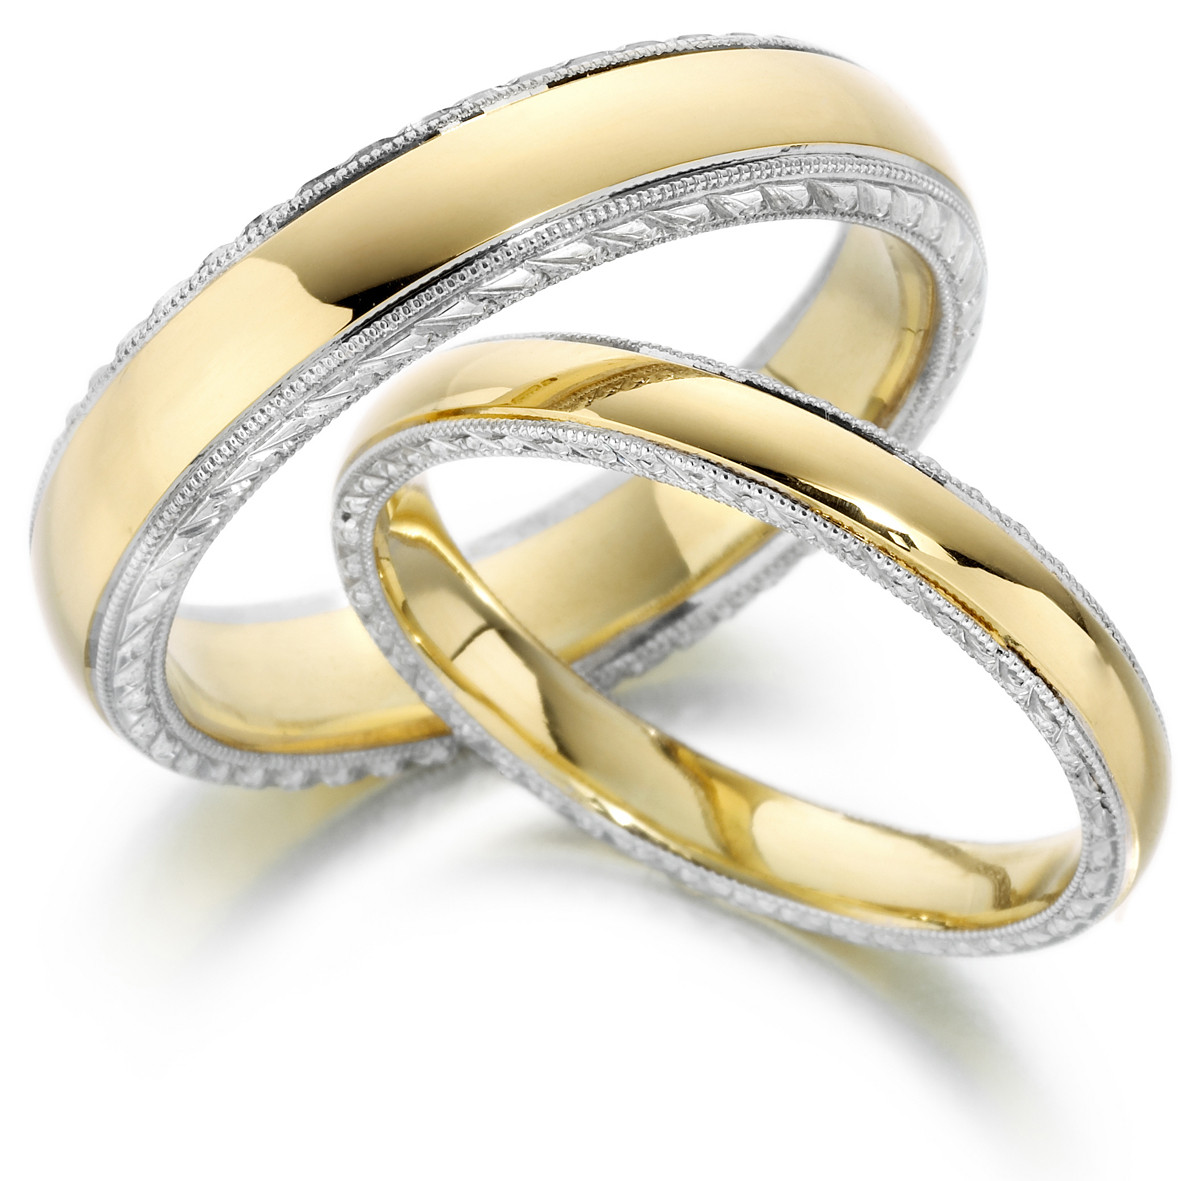 Picture Of Wedding Rings
 I am now an official supplier for Charles Green wedding